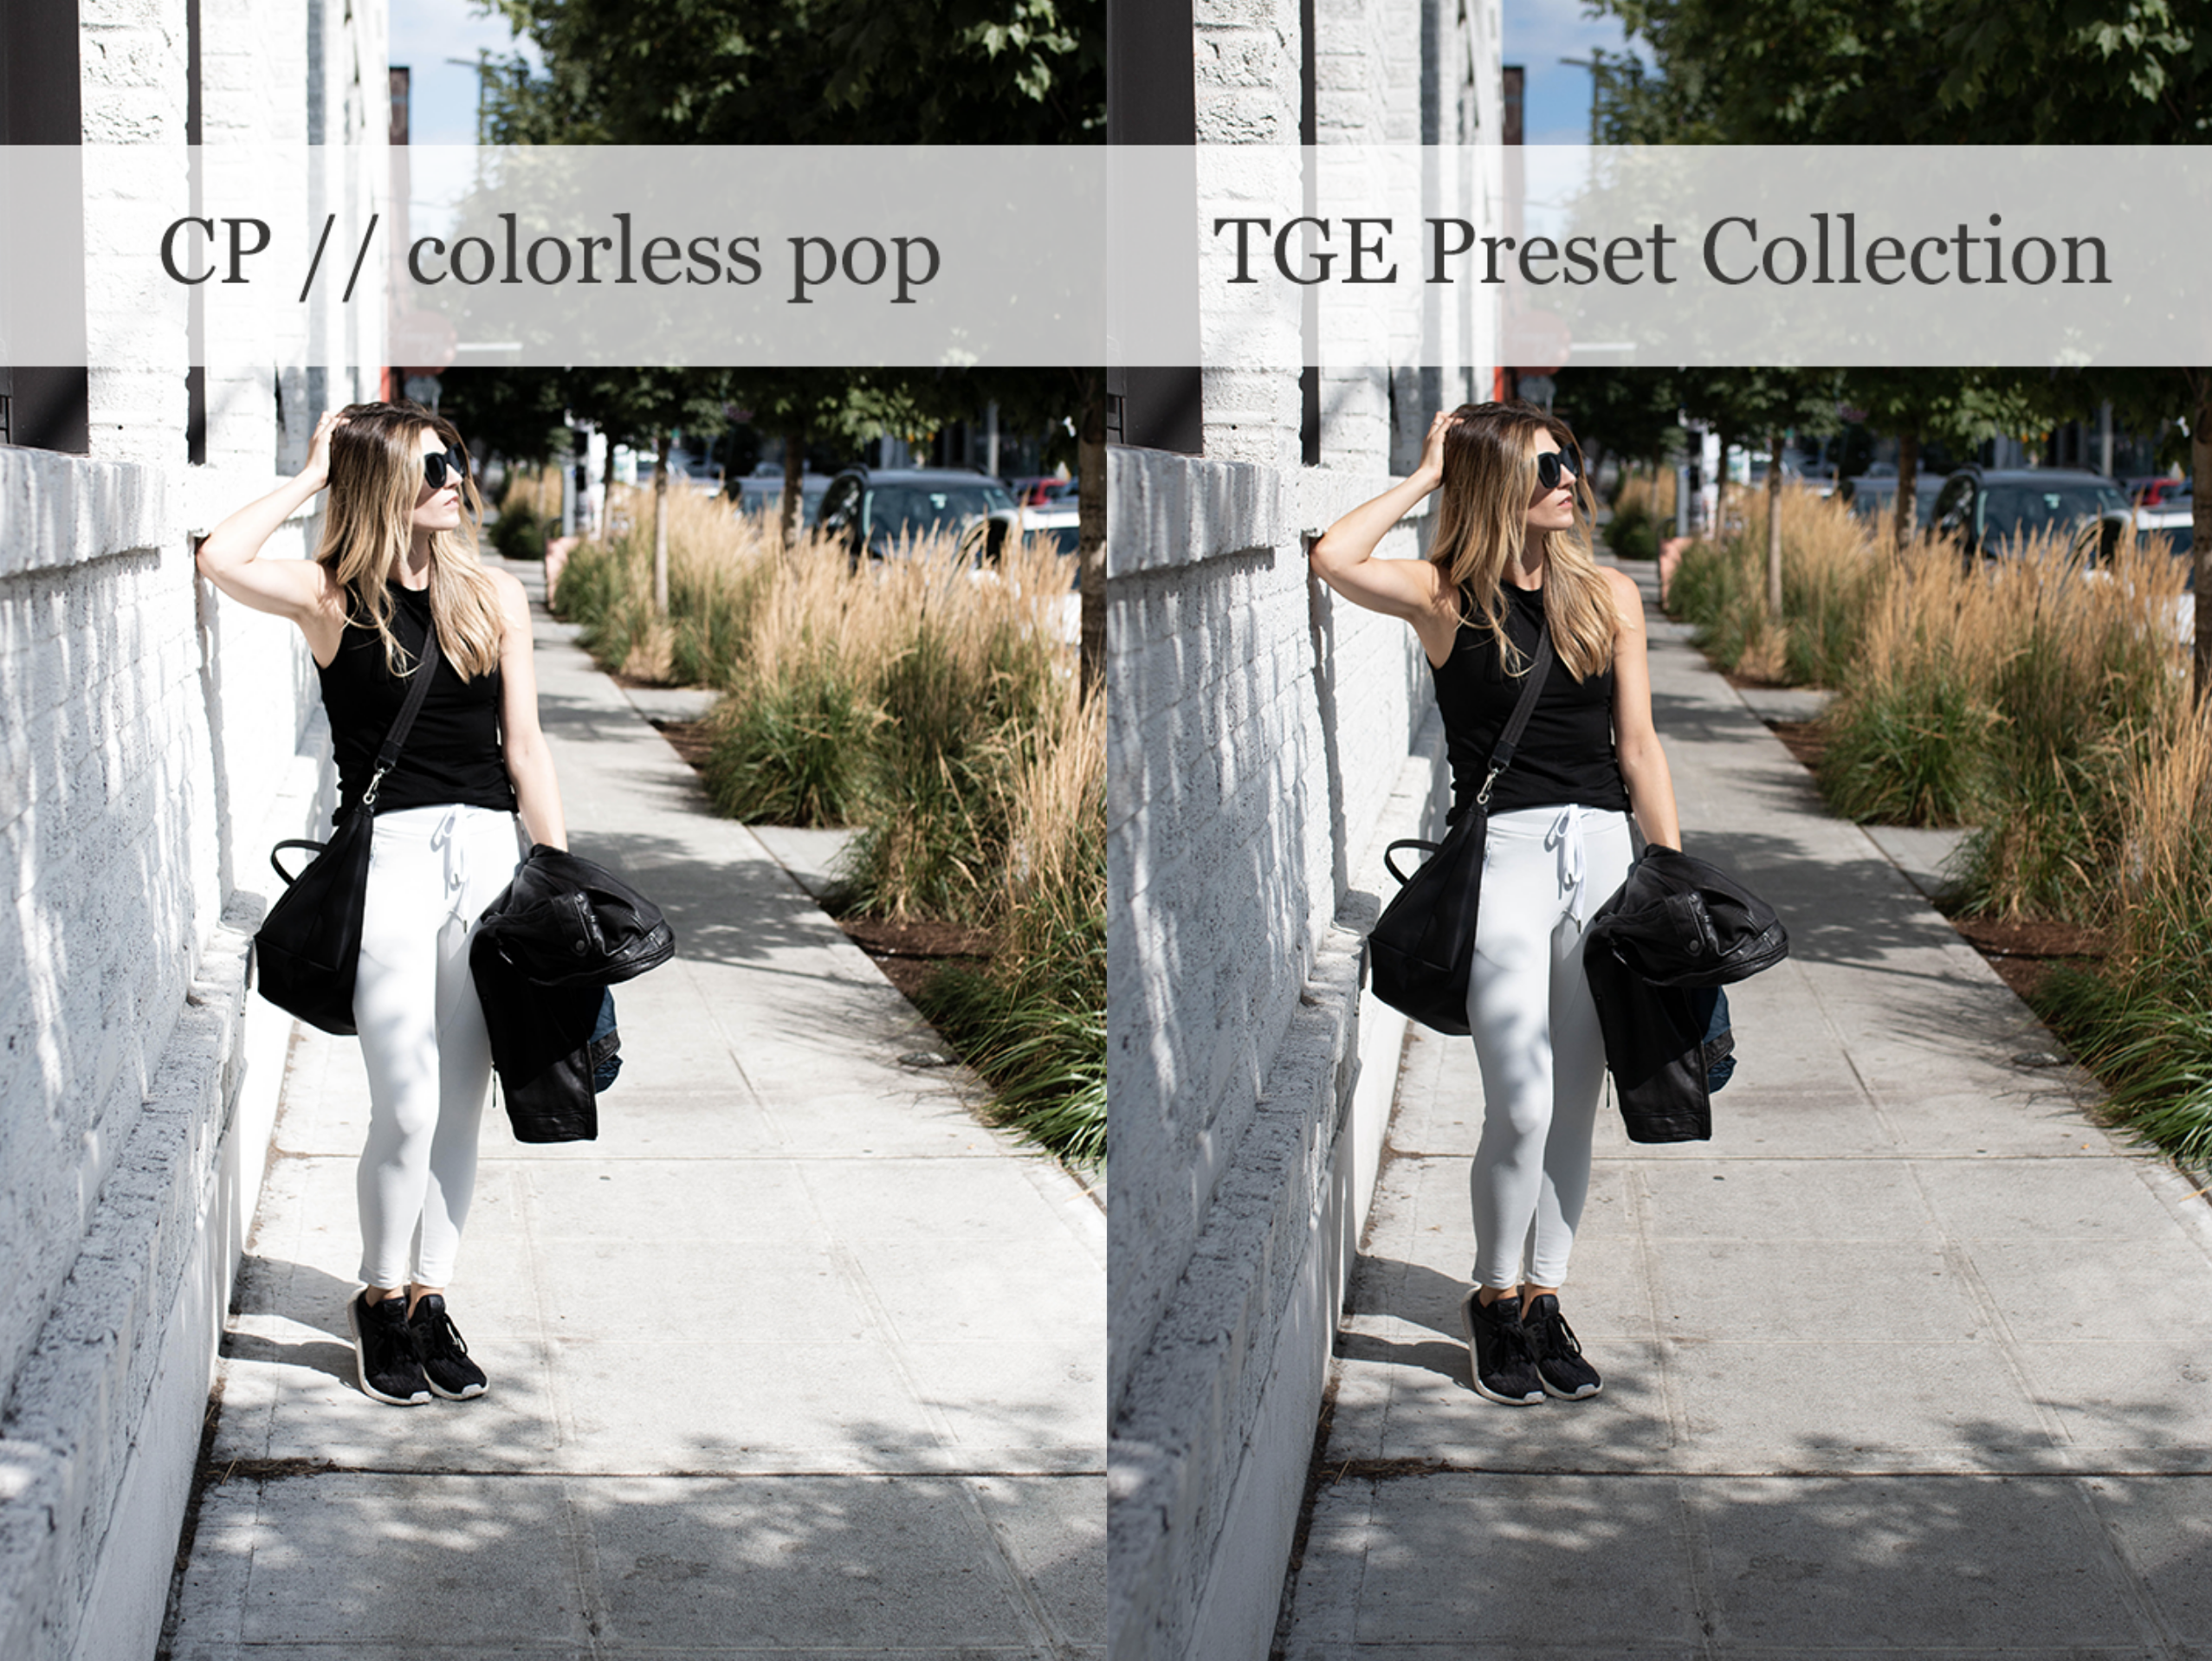 TGE Preset Collection | colorless pop